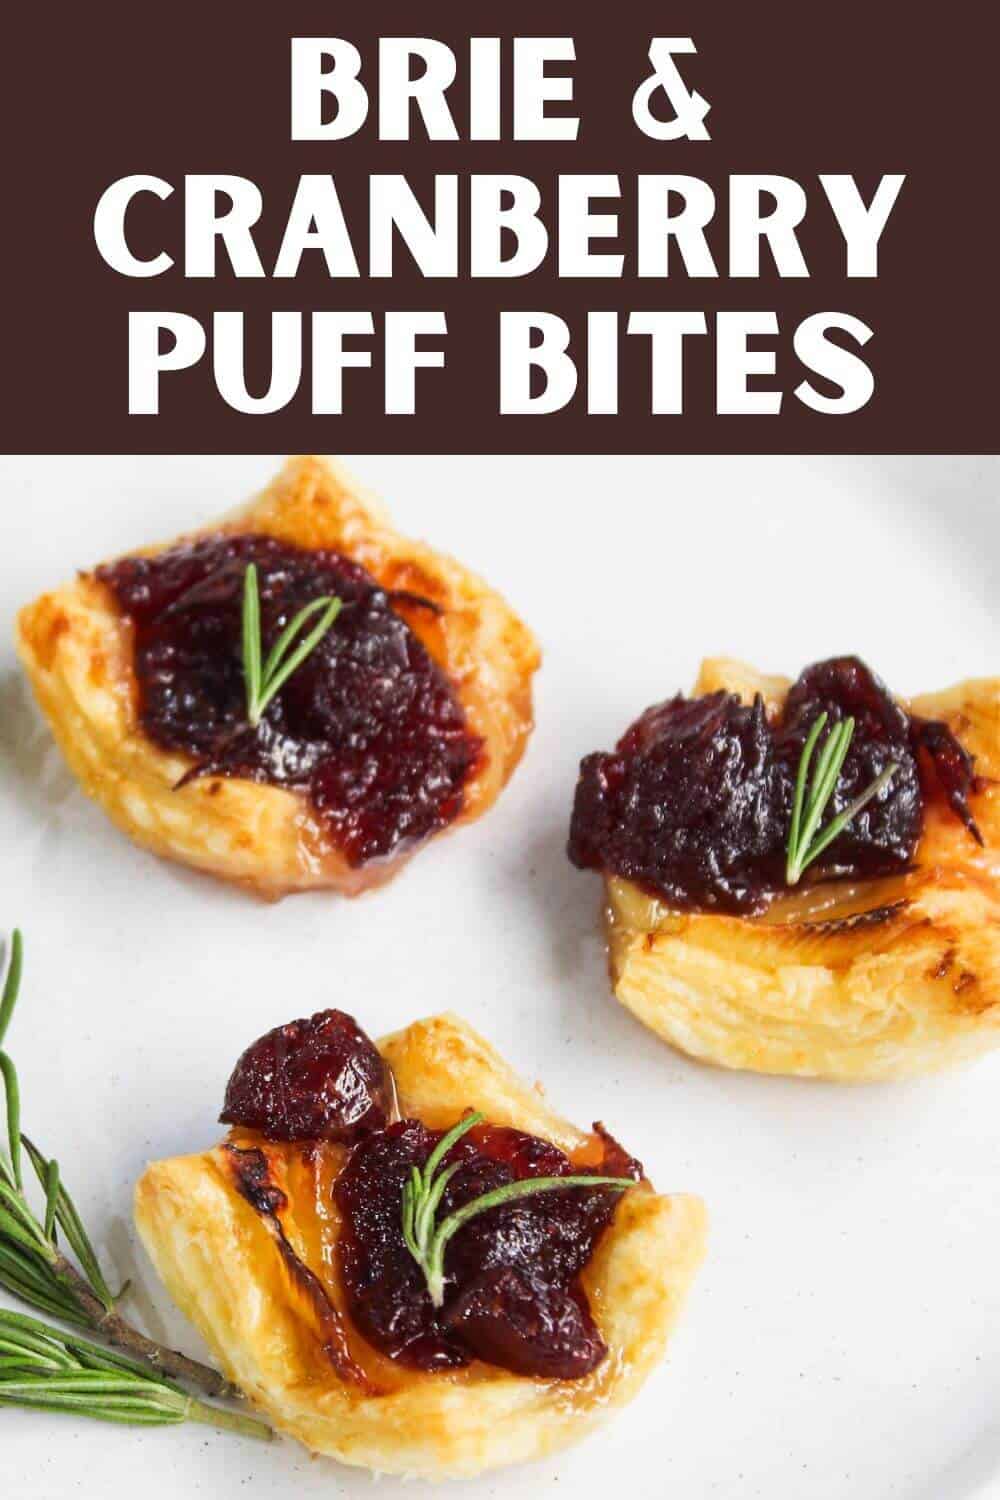 Brie and cranberry puff bites.